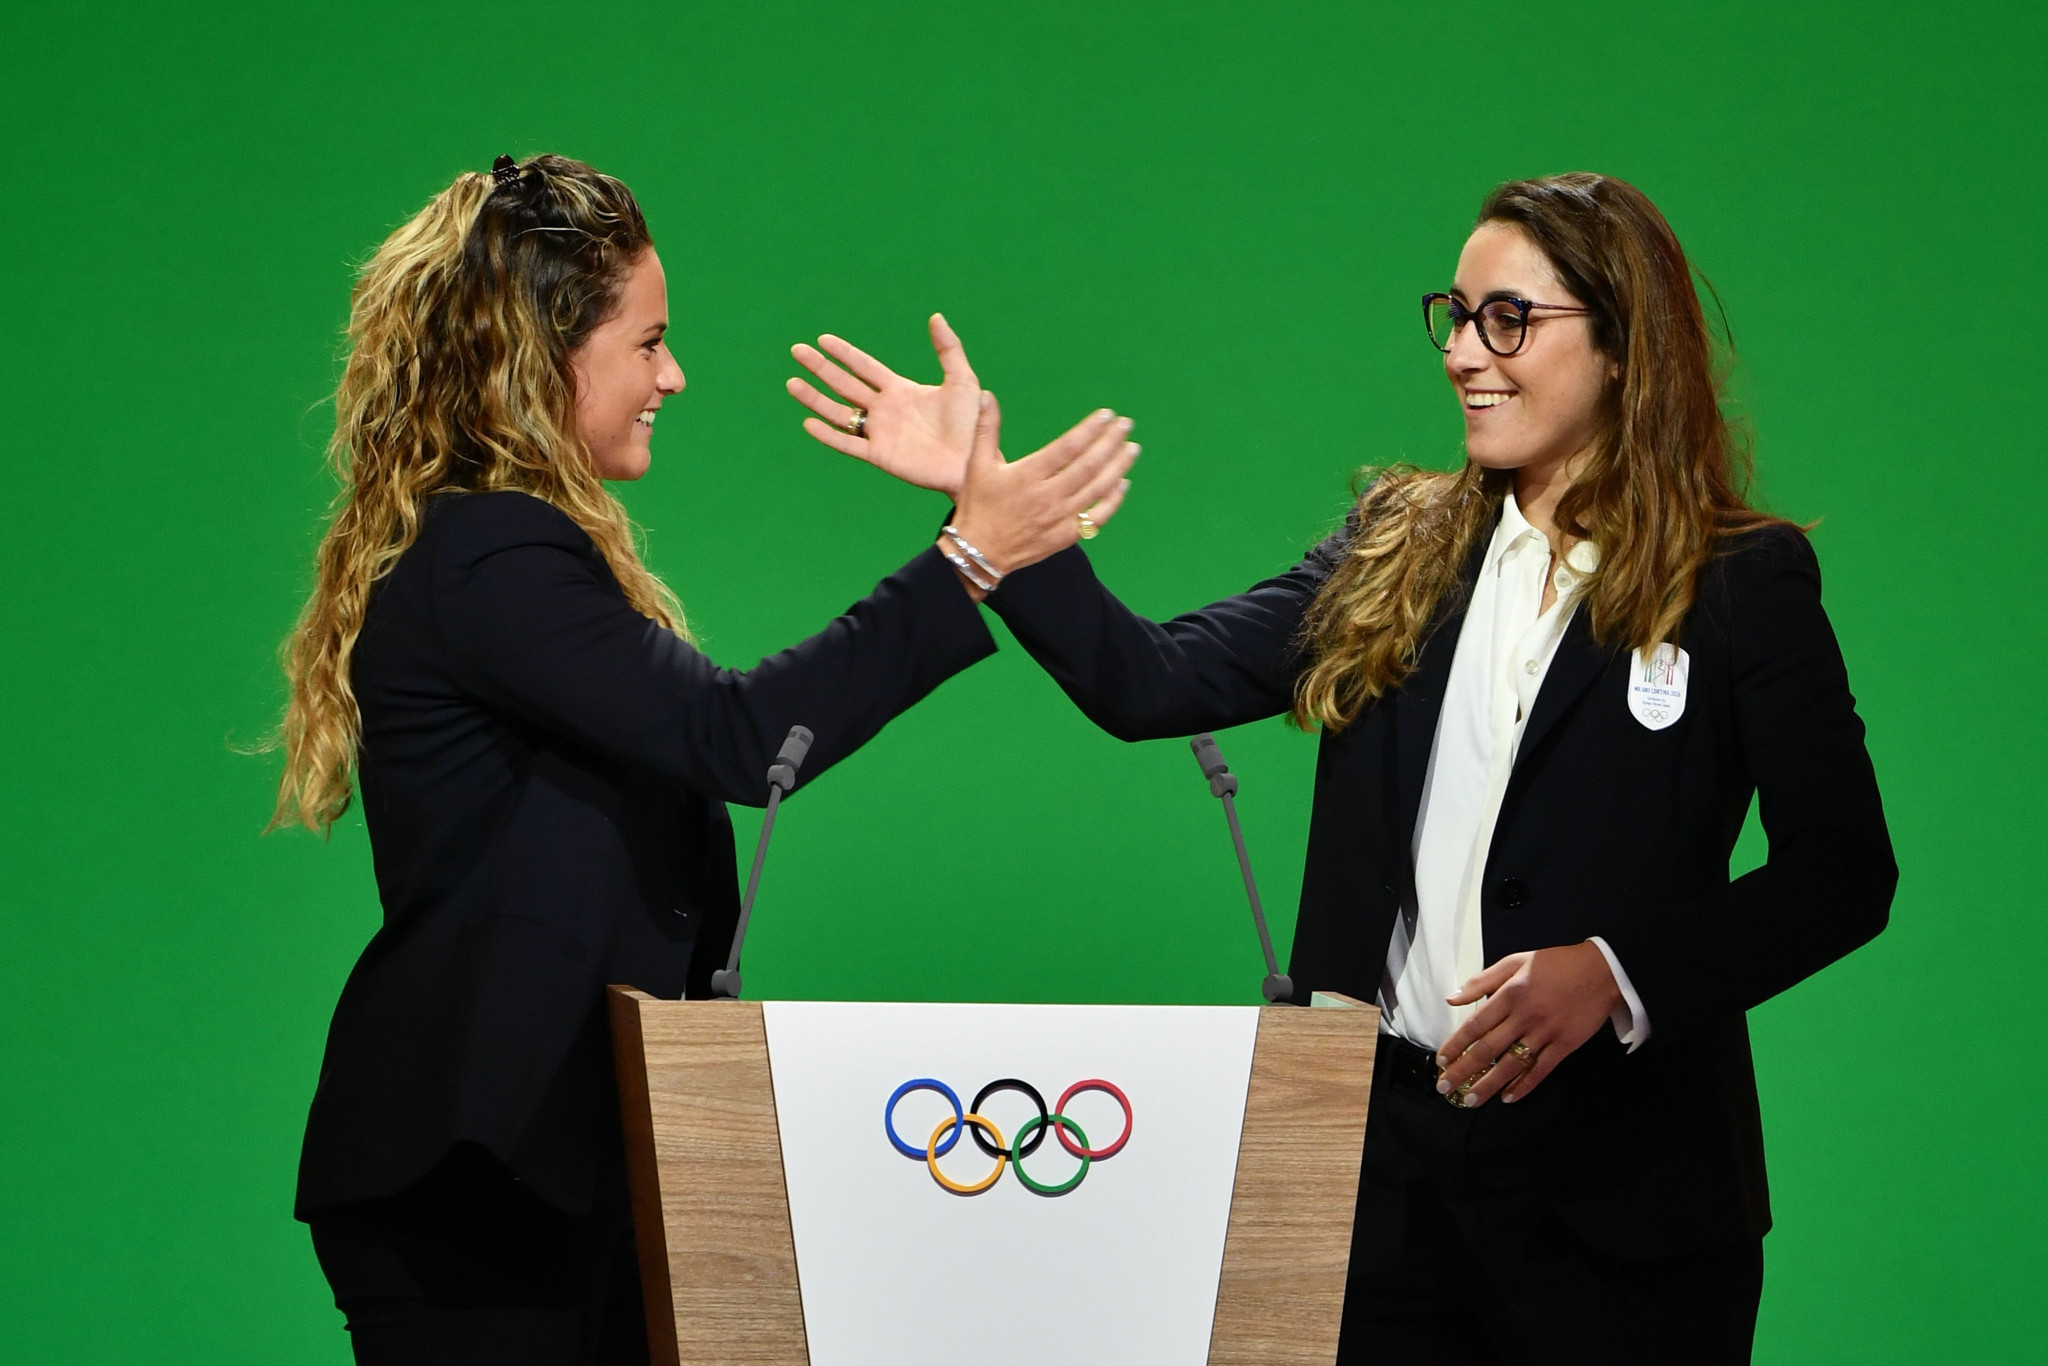 Italian athletes headlined the Milan Cortina 2026 presentation to the IOC Session ©Getty Images